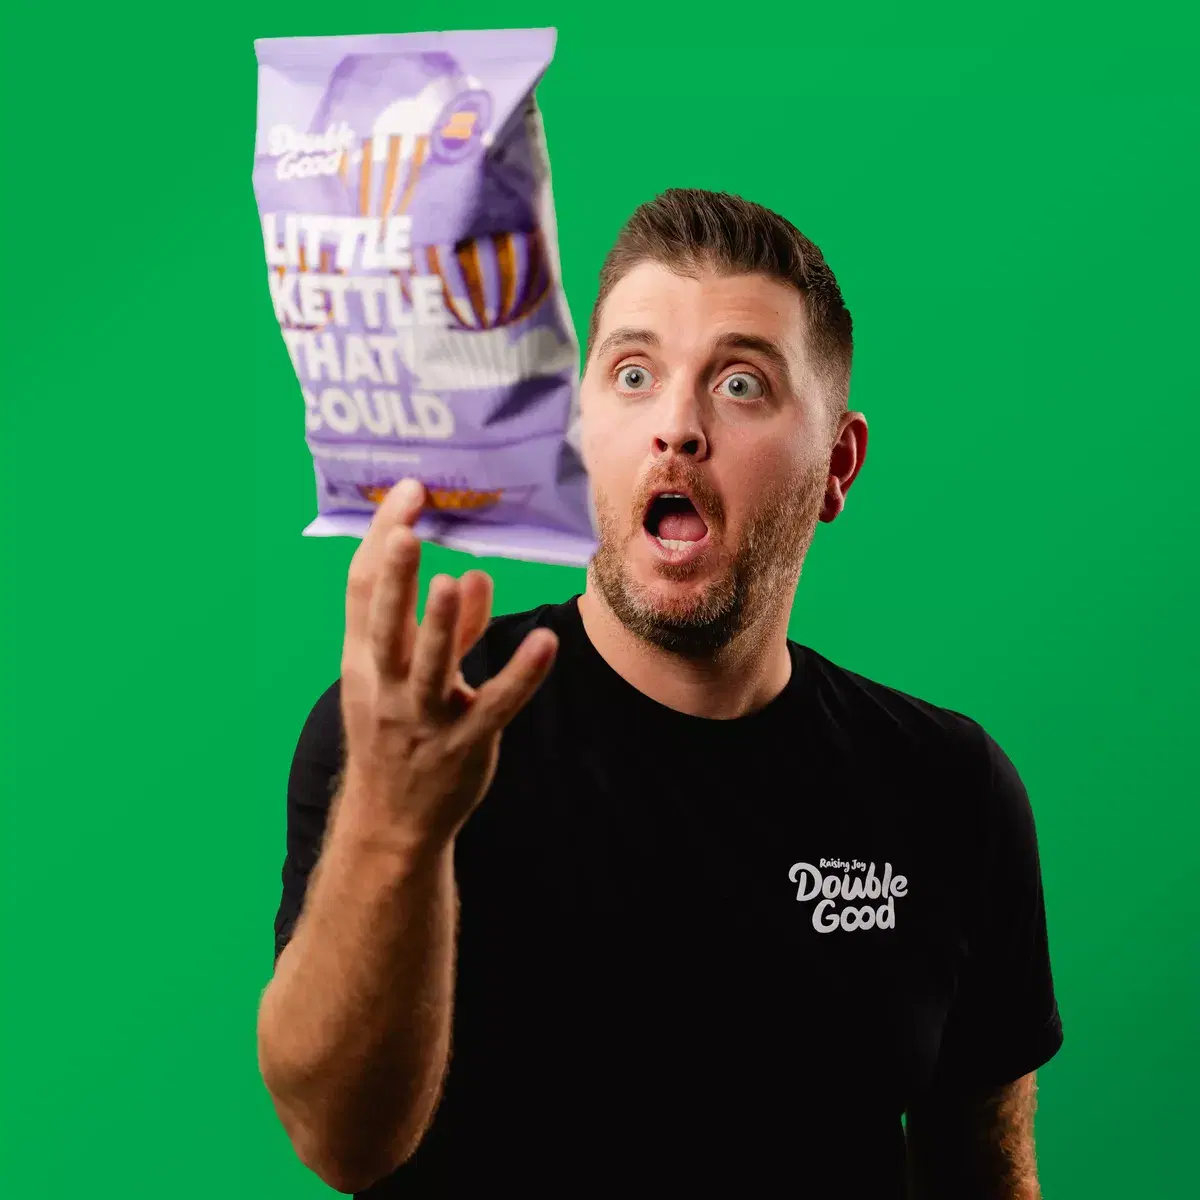 Dan is balancing a bag of popcorn on his finger and is expressing shock and amazement with his face.